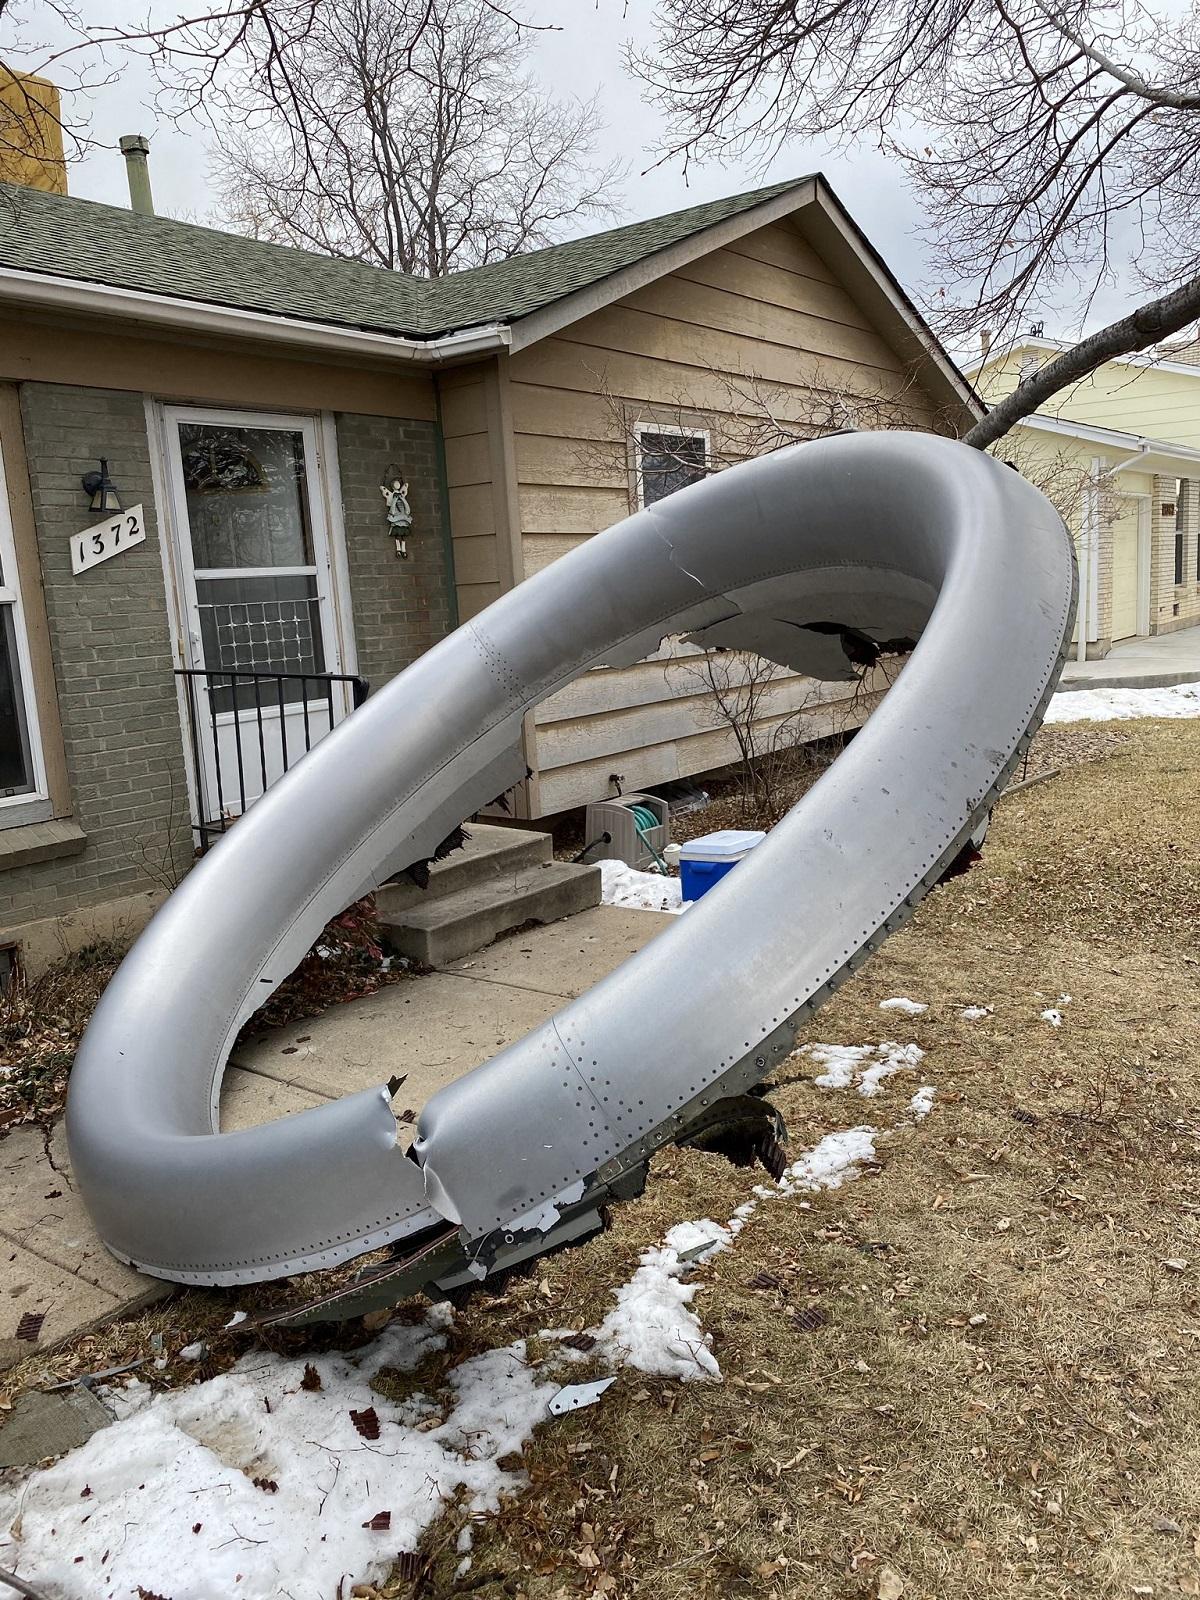 United Airlines airplane's engine in the neighborhood of Broomfield, outside Denver, Colorado, on February 20, 2021. A United Airlines flight suffered a fiery engine failure February 20, shortly after taking off from Denver on its way to Hawaii, dropping massive debris on a residential area before a safe emergency landing, officials said. Broomfield Police Department/AFP